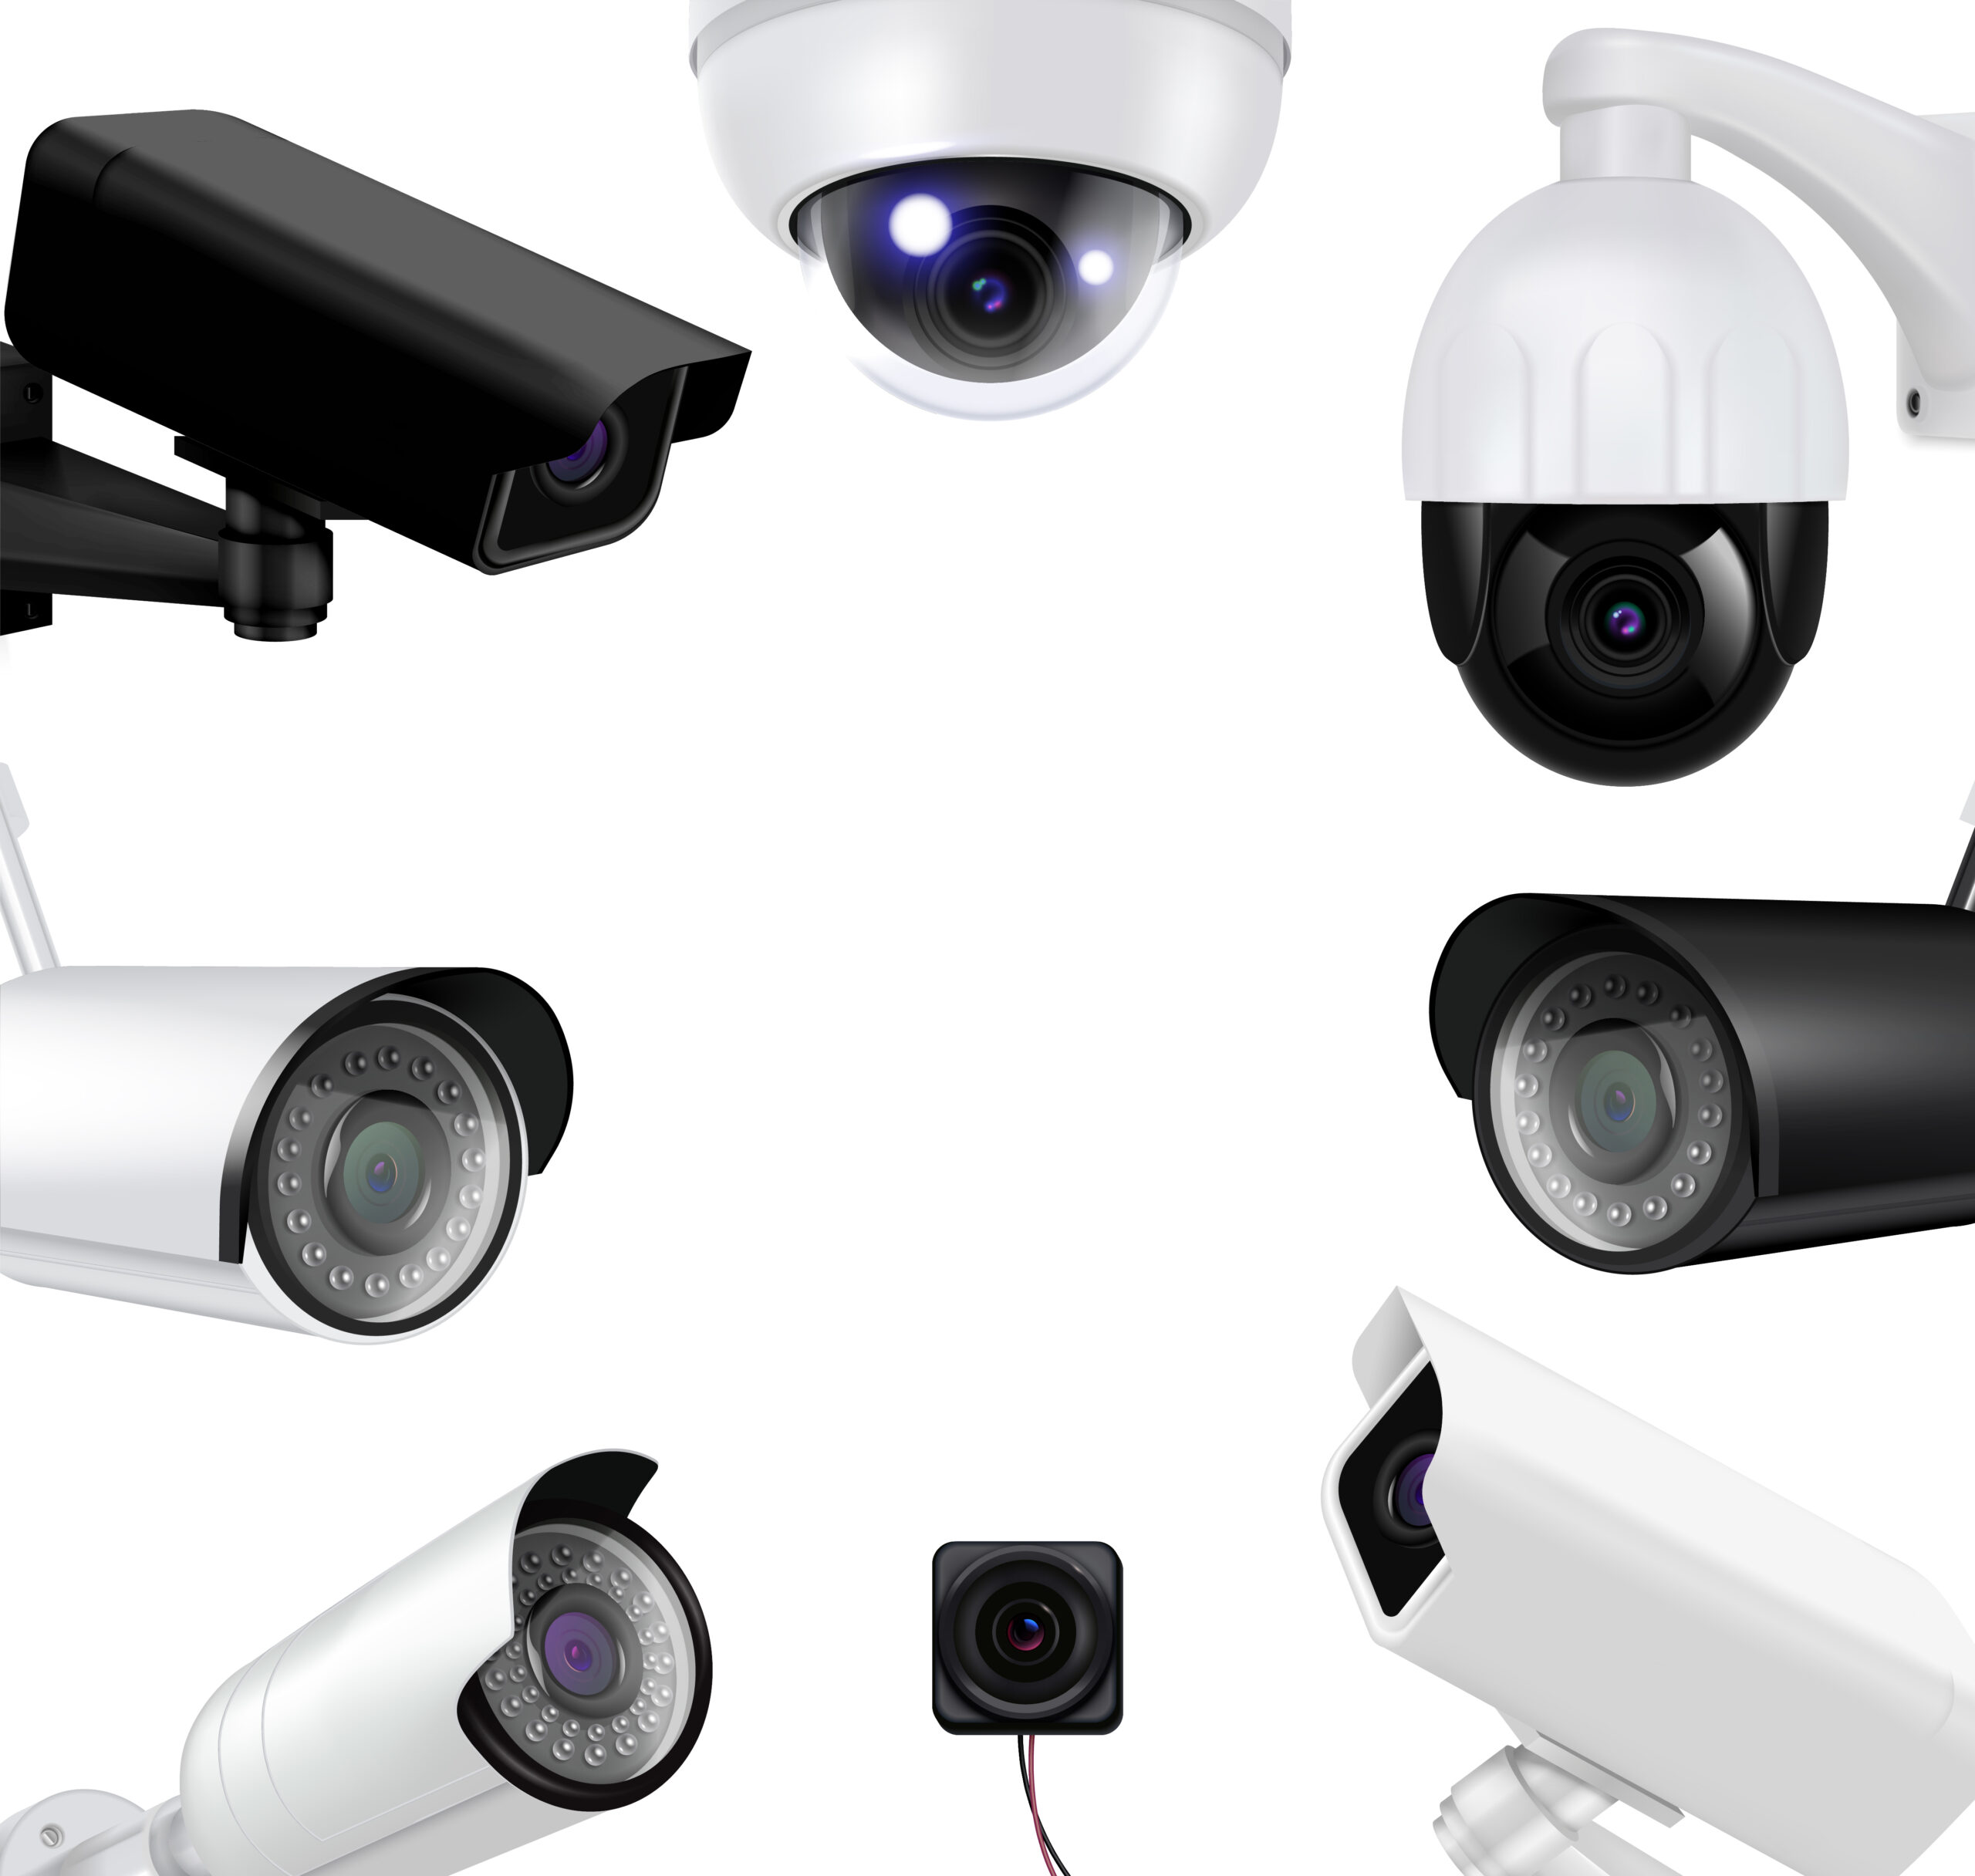 Enhancing Security With Axis IP Camera Systems